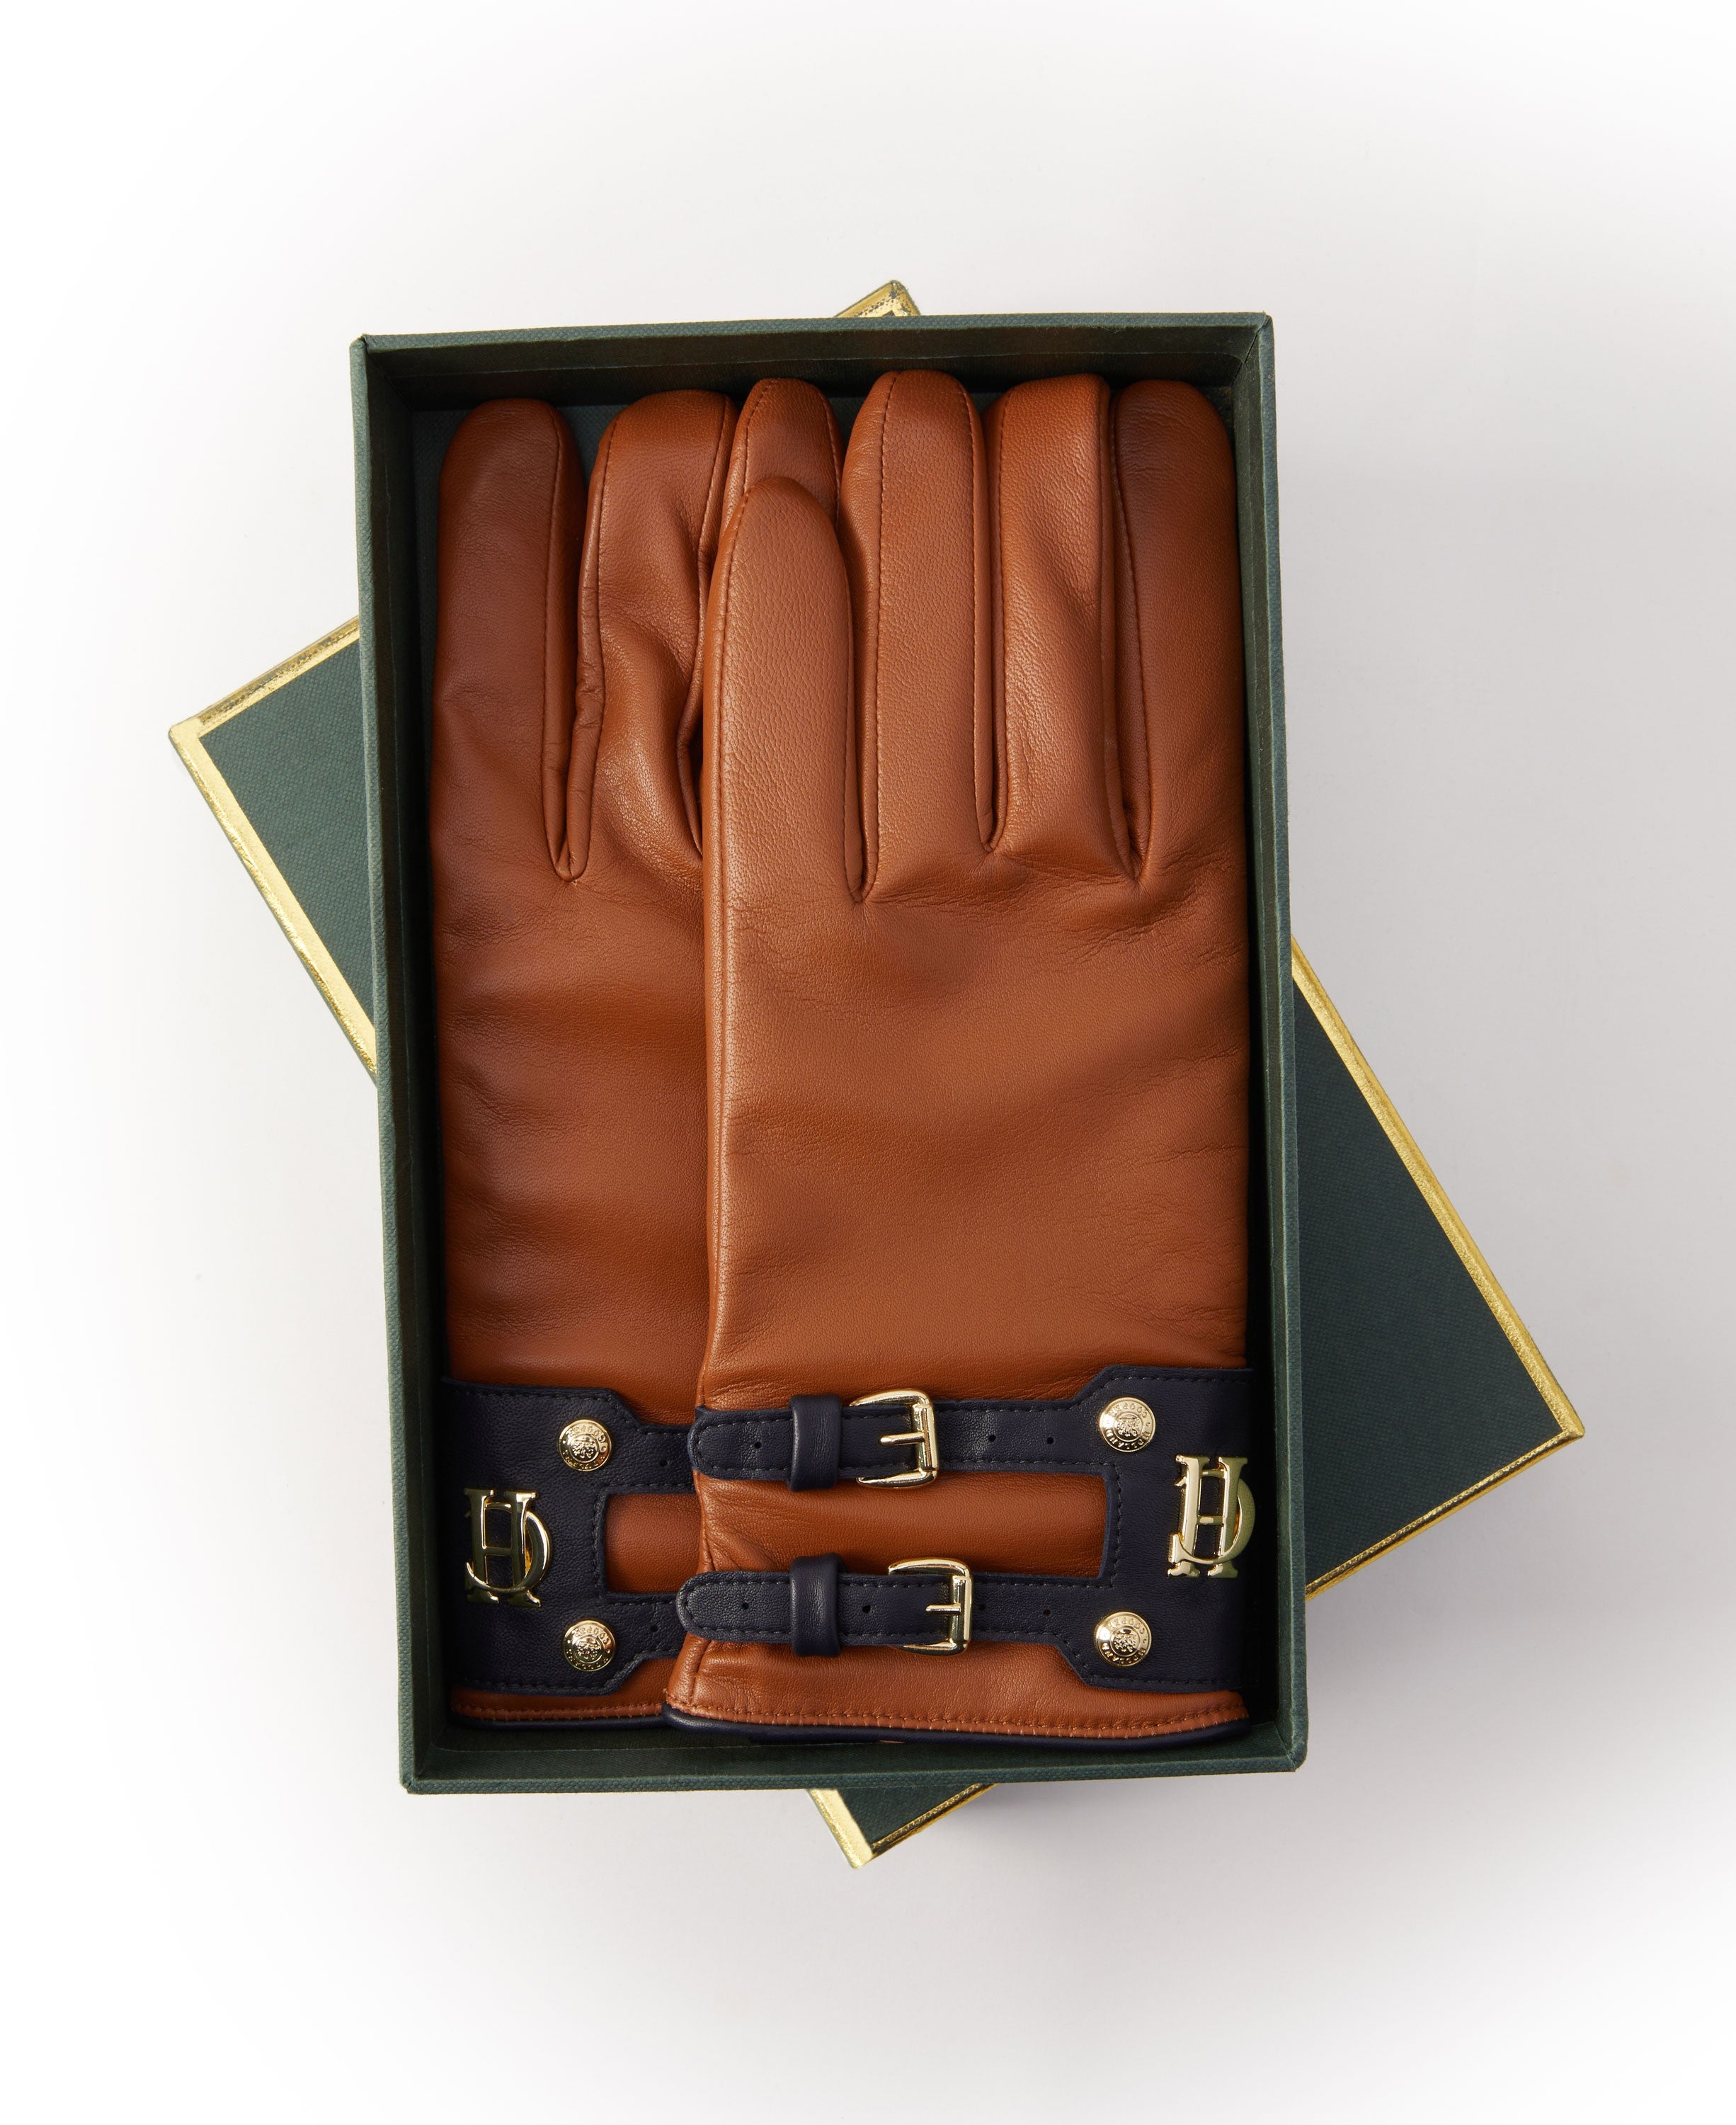 Contrast Leather Gloves - Tan/Ink Navy